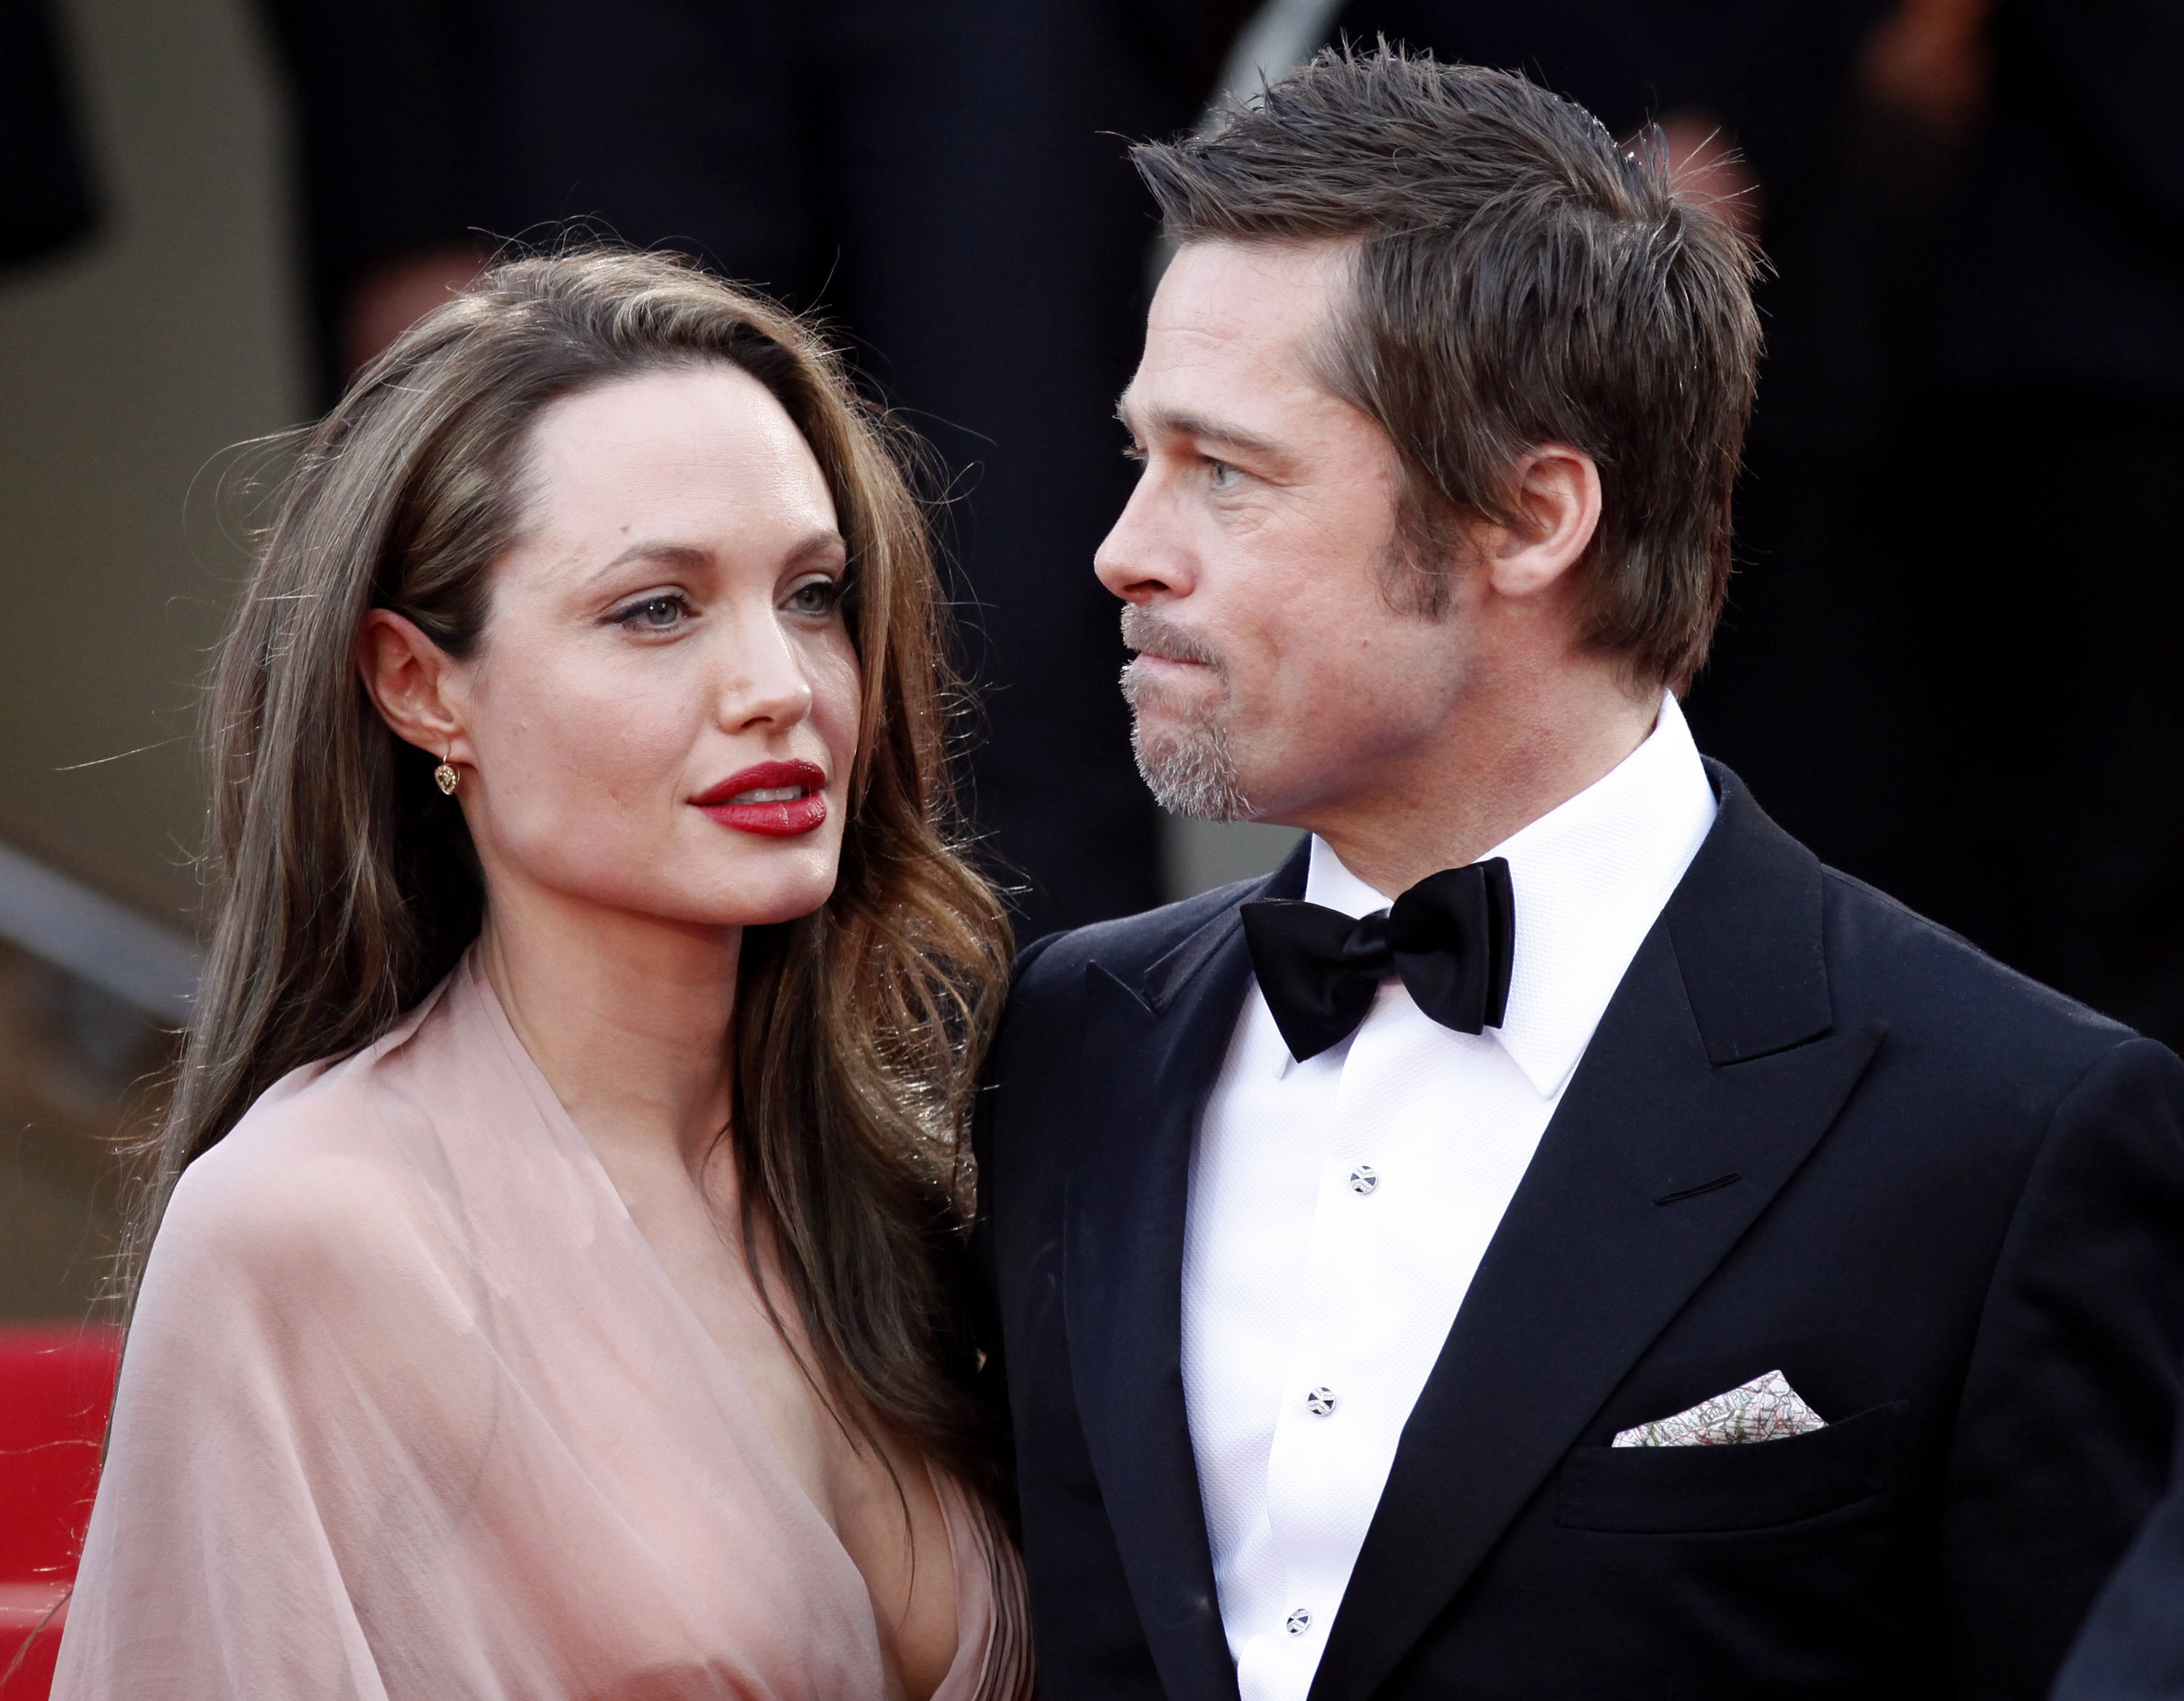 Angelina Jolie and Brad Pitt attend the 'Inglourious Basterds' Premiere at the Grand Theatre Lumiere during the 62nd Annual Cannes Film Festival on May 20, 2009 in Cannes, France | Source: Getty Images 